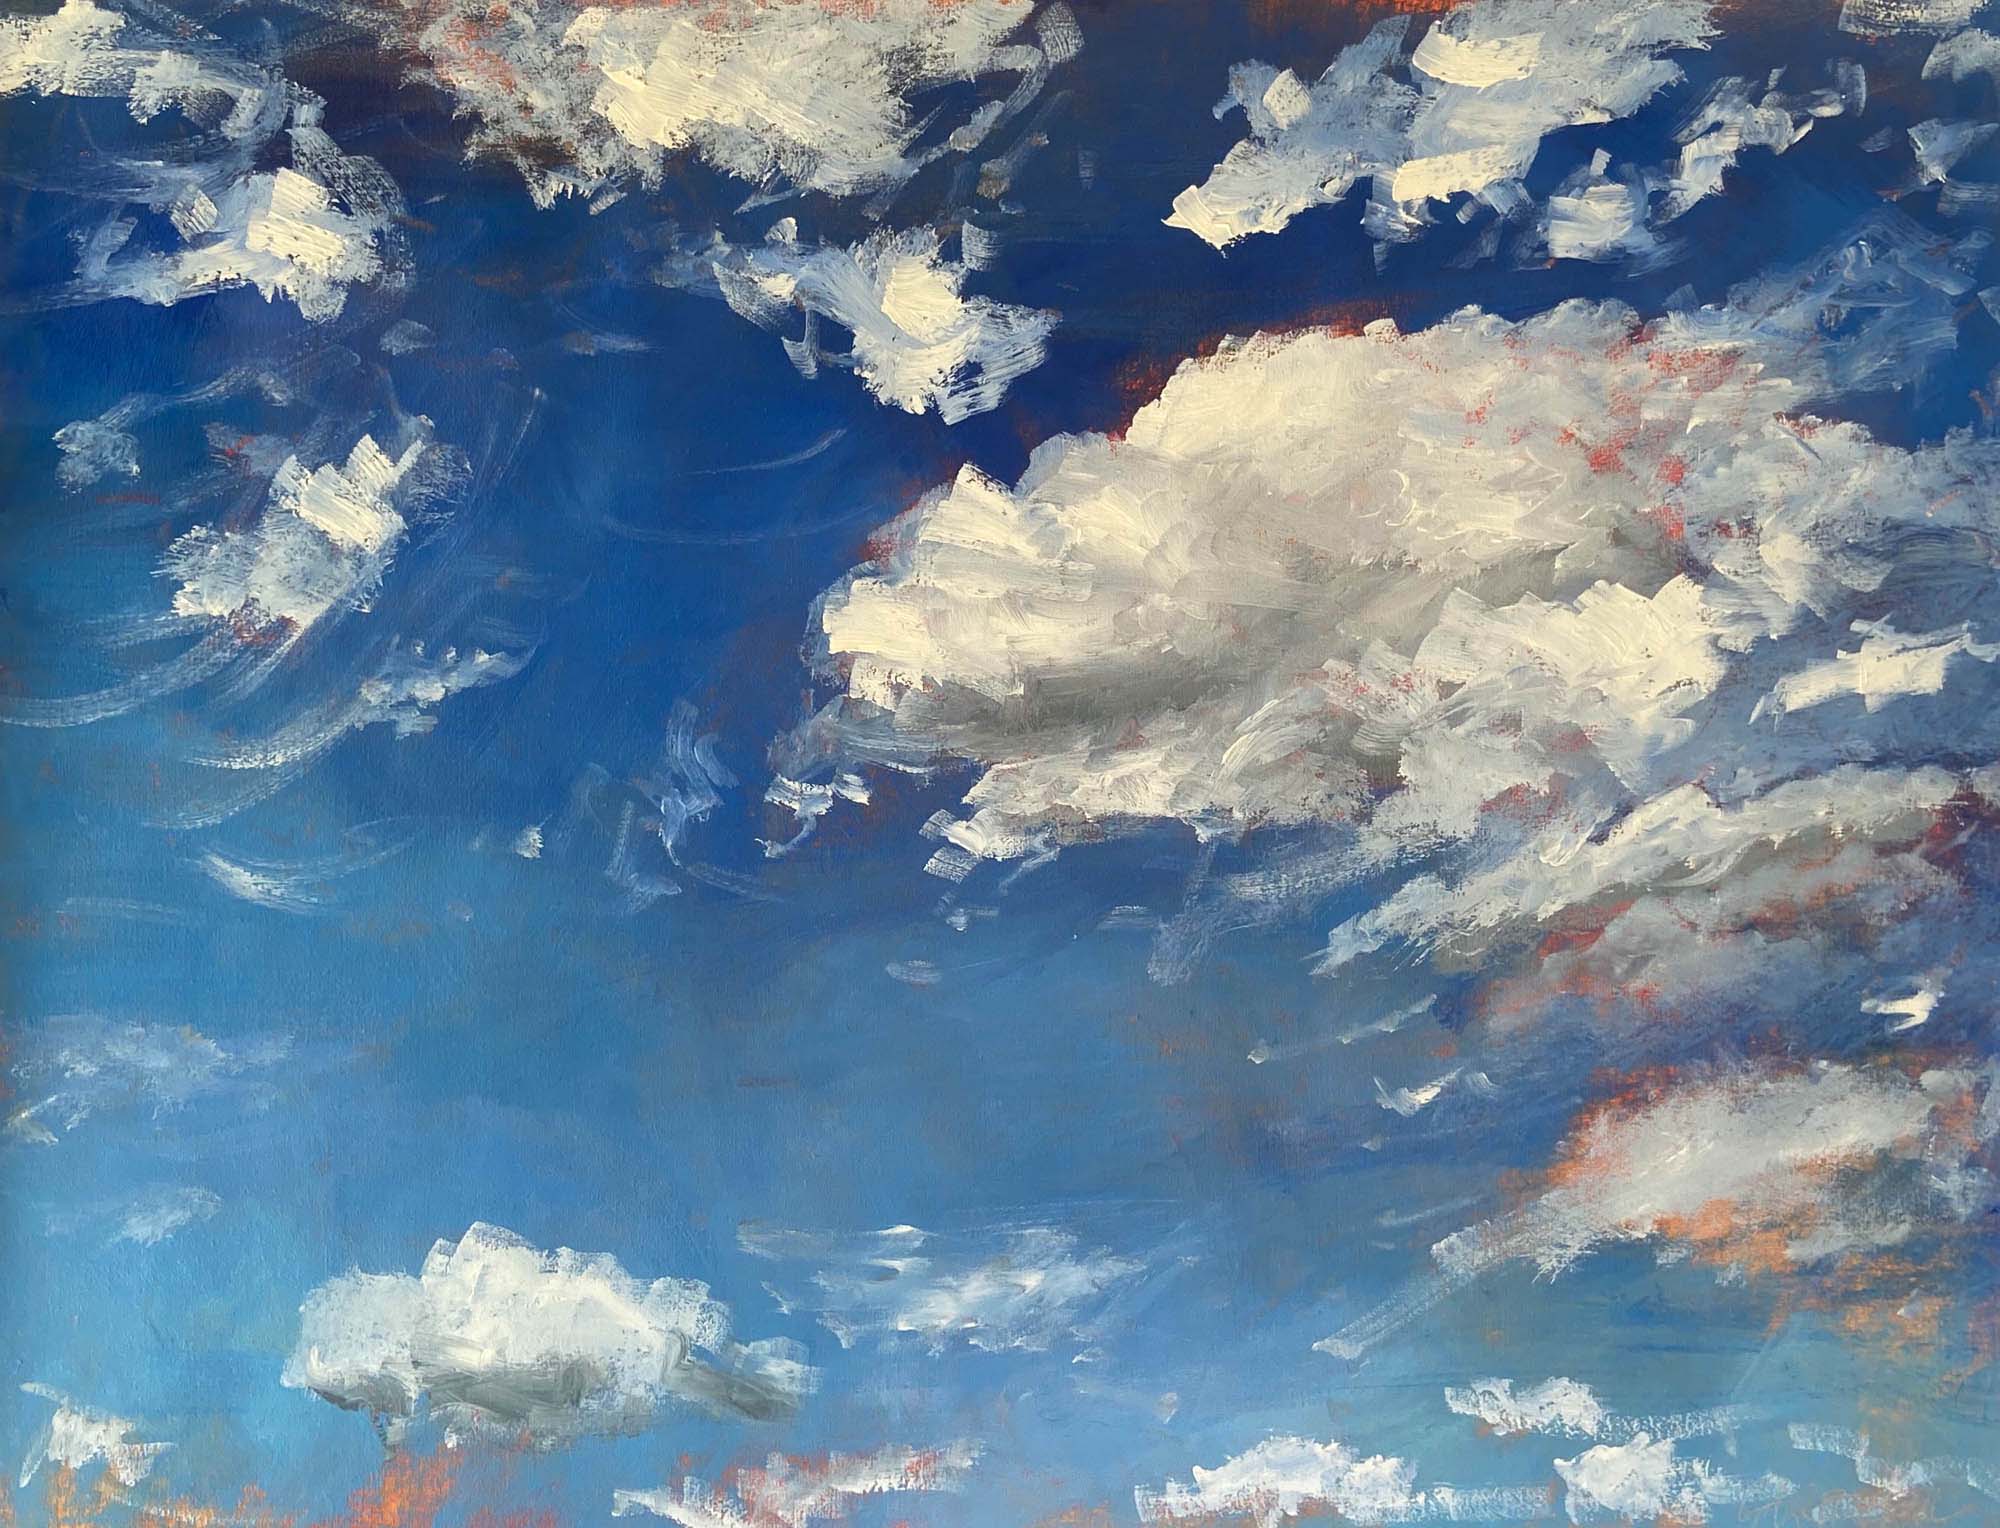 Expressive paint strokes to indicate an upward view of clouds